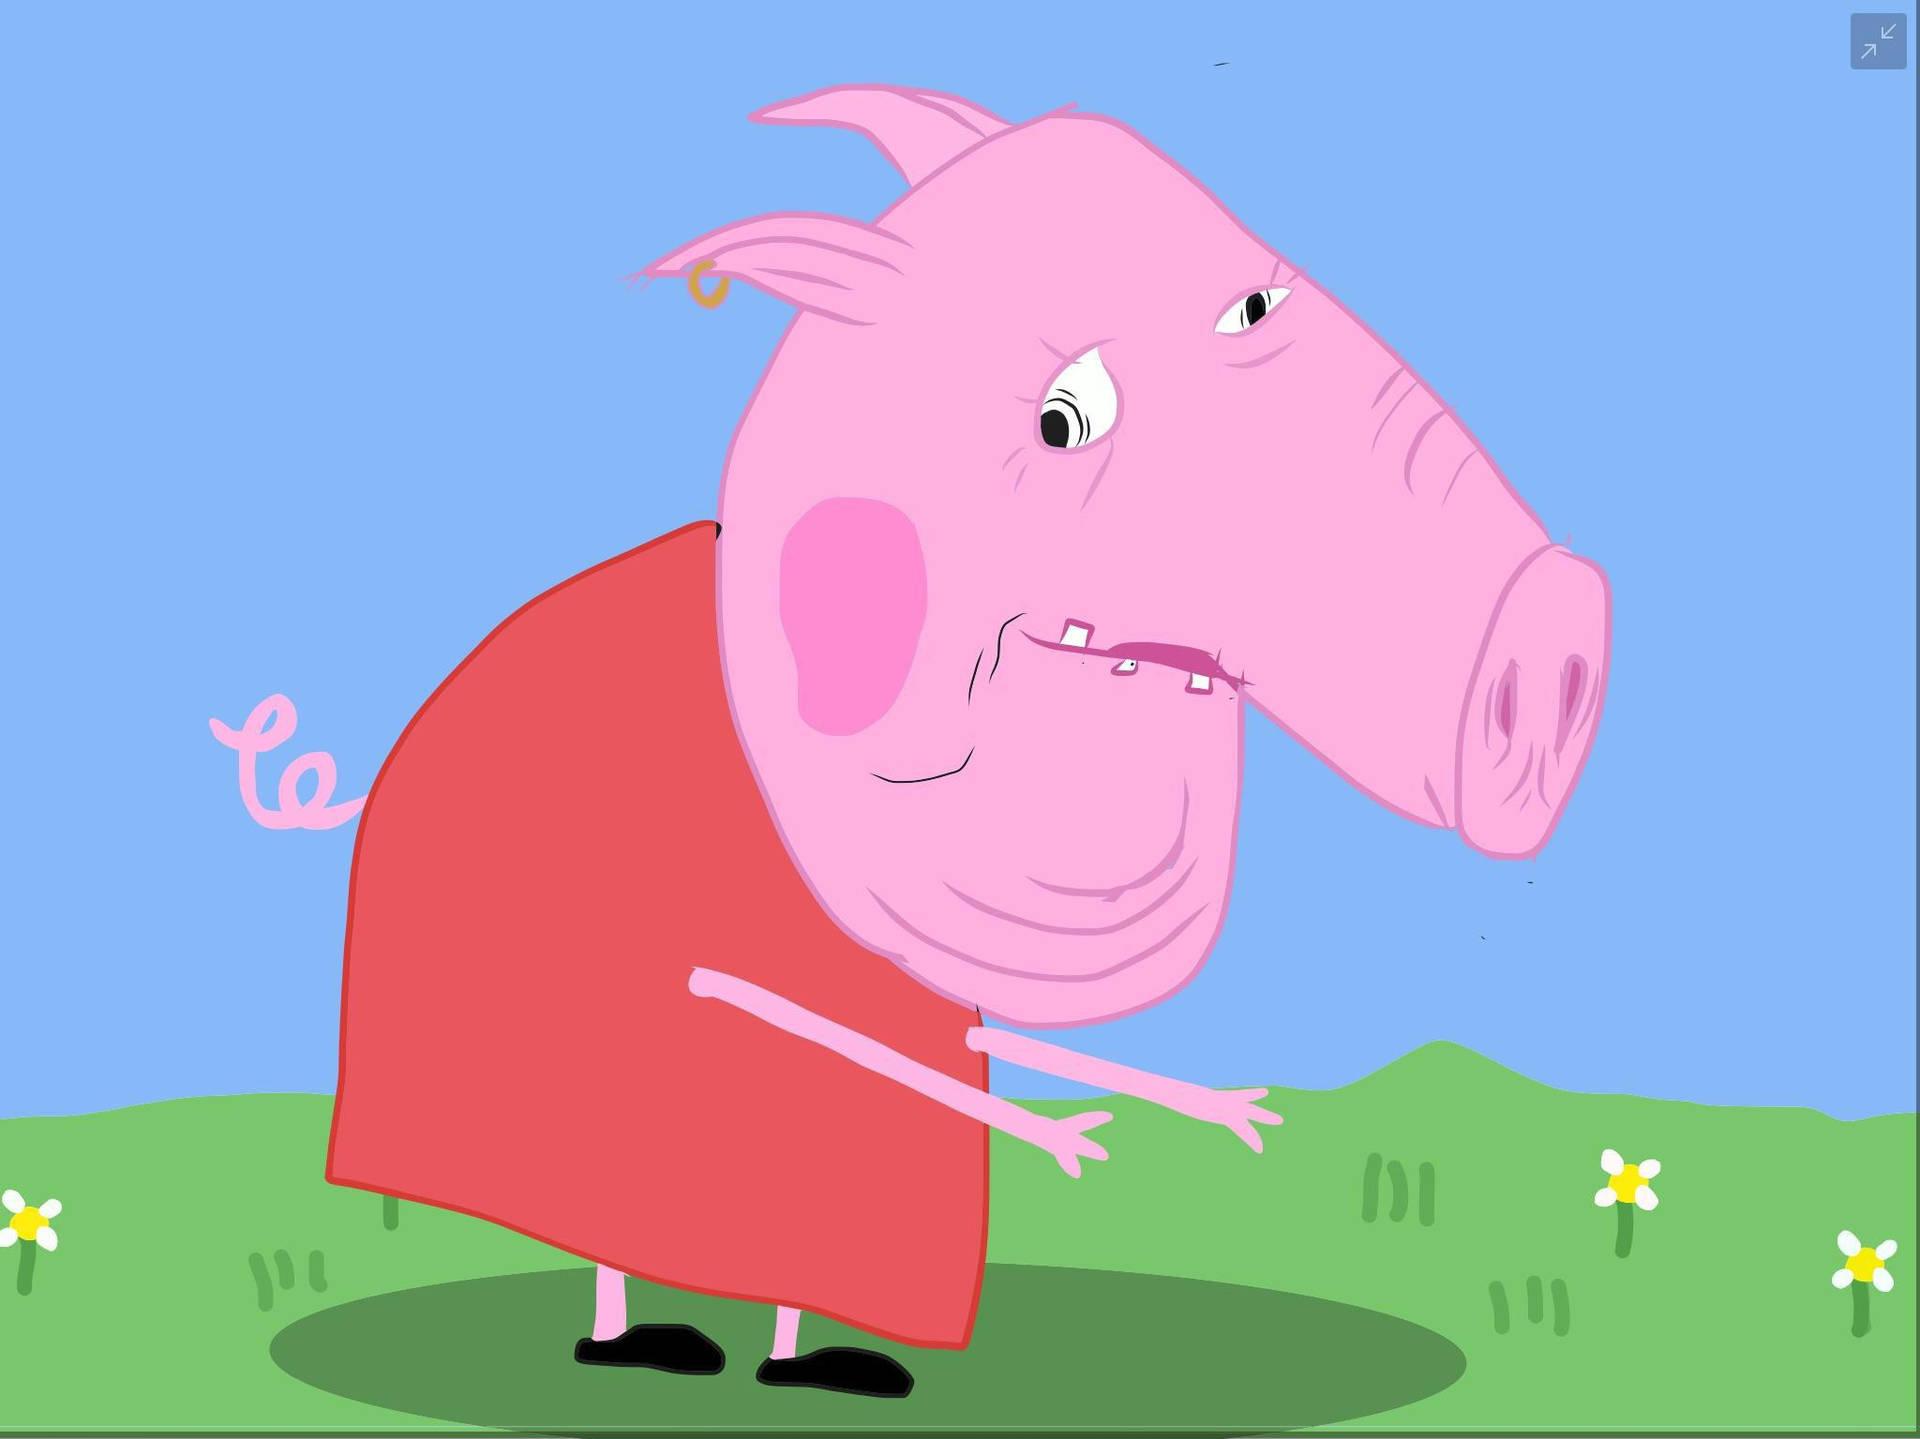 Hunched Over Peppa Pig Meme Wallpaper